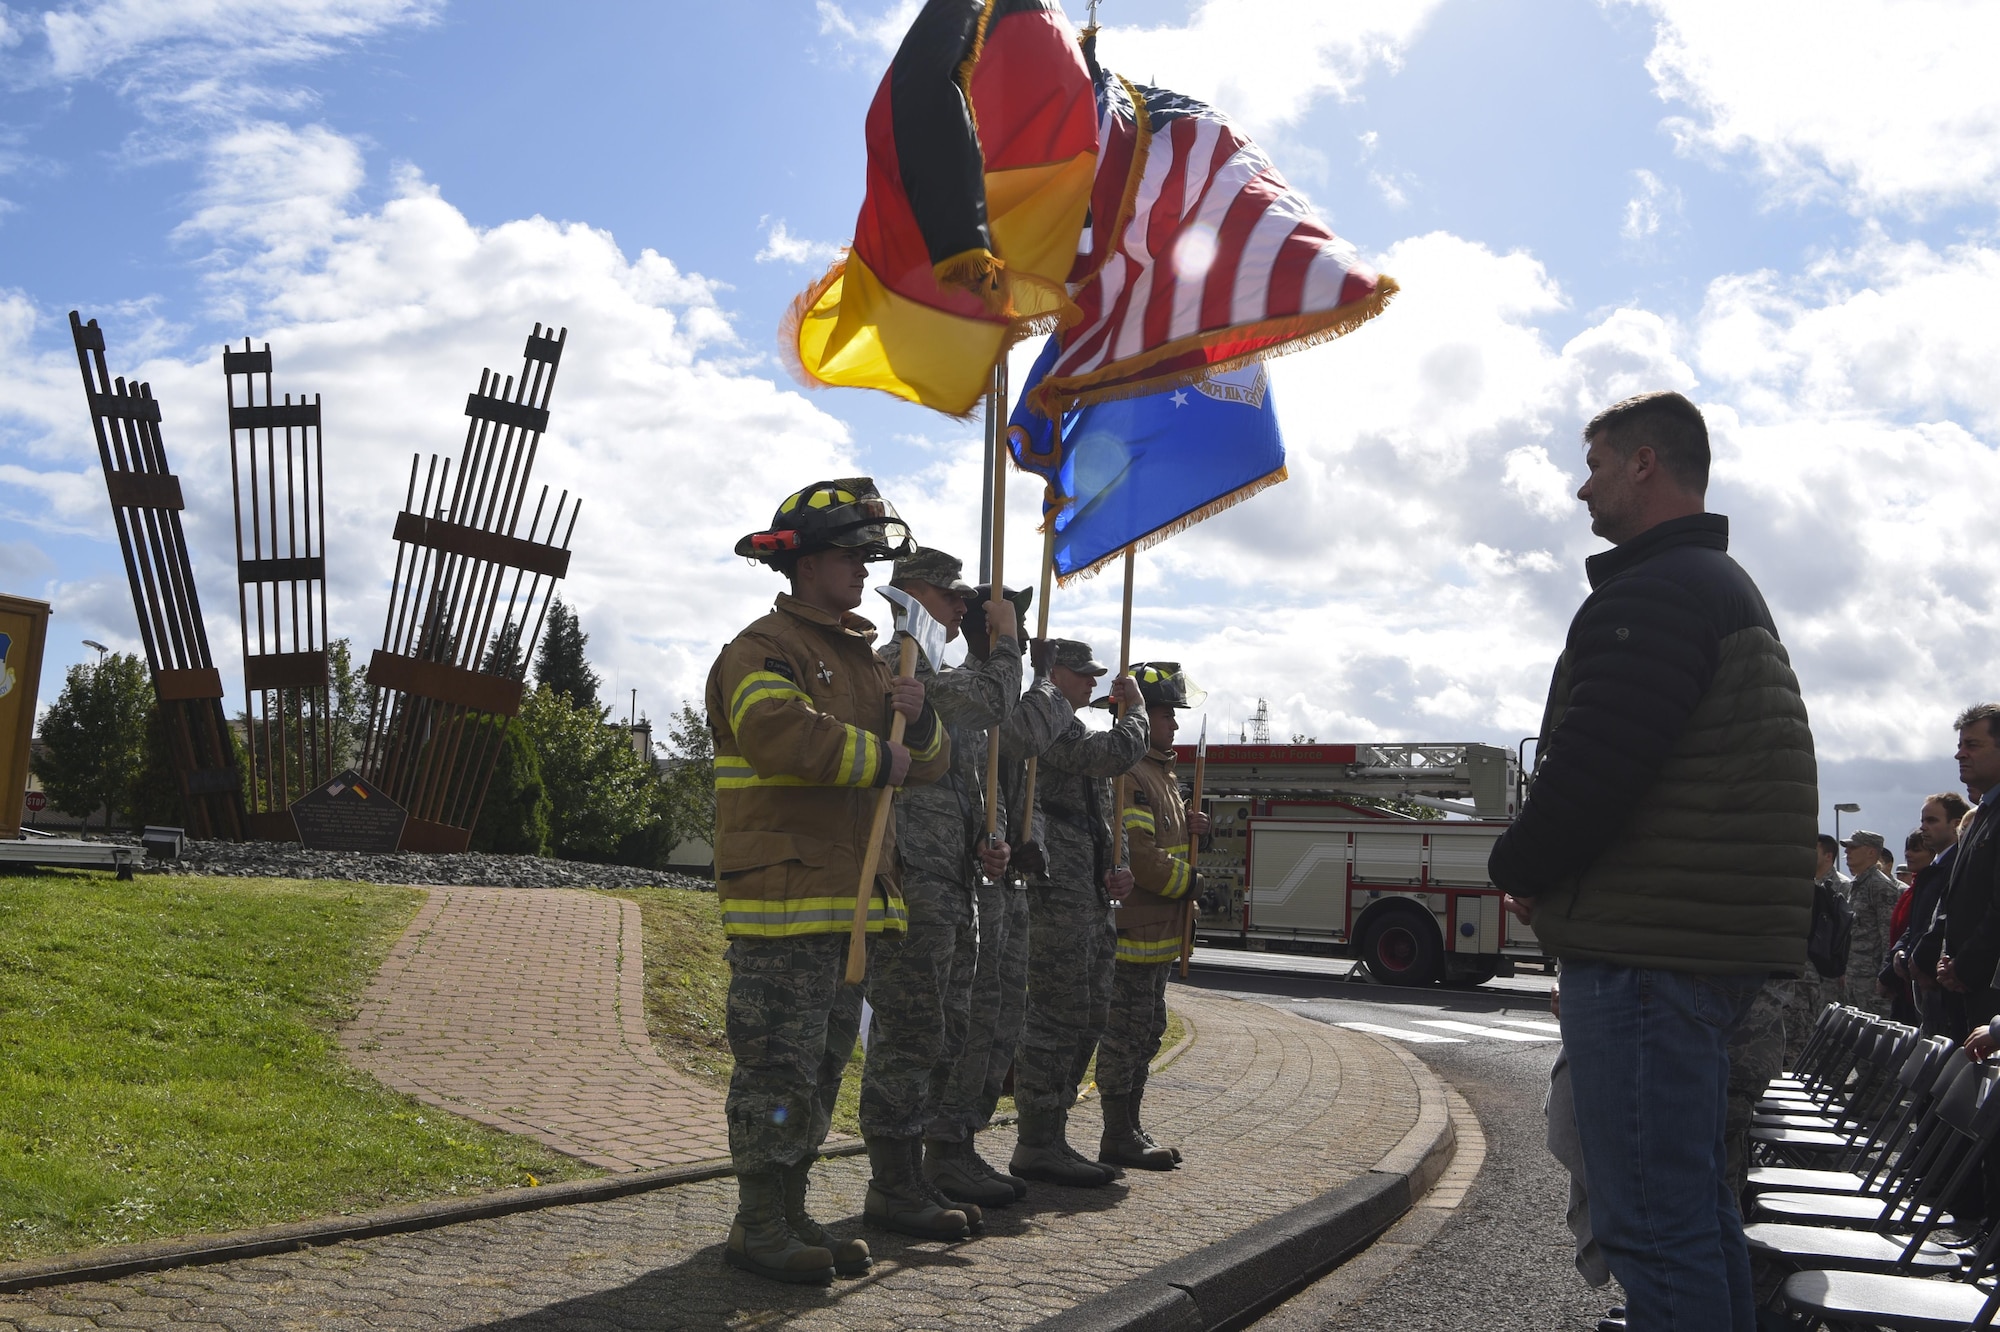 The 52nd Fighter Wing Honor Guard posts the flags of the United States, Germany and the Air Force during the 9/11 memorial ceremony at the air park on Spangdahlem Air Base, Germany, September 11, 2017. Ceremonies throughout the Air Force and around the world took place to commemorate the 16th anniversary of the attacks on 9/11. (U.S. Air Force photo by Senior Airman Dawn M. Weber)